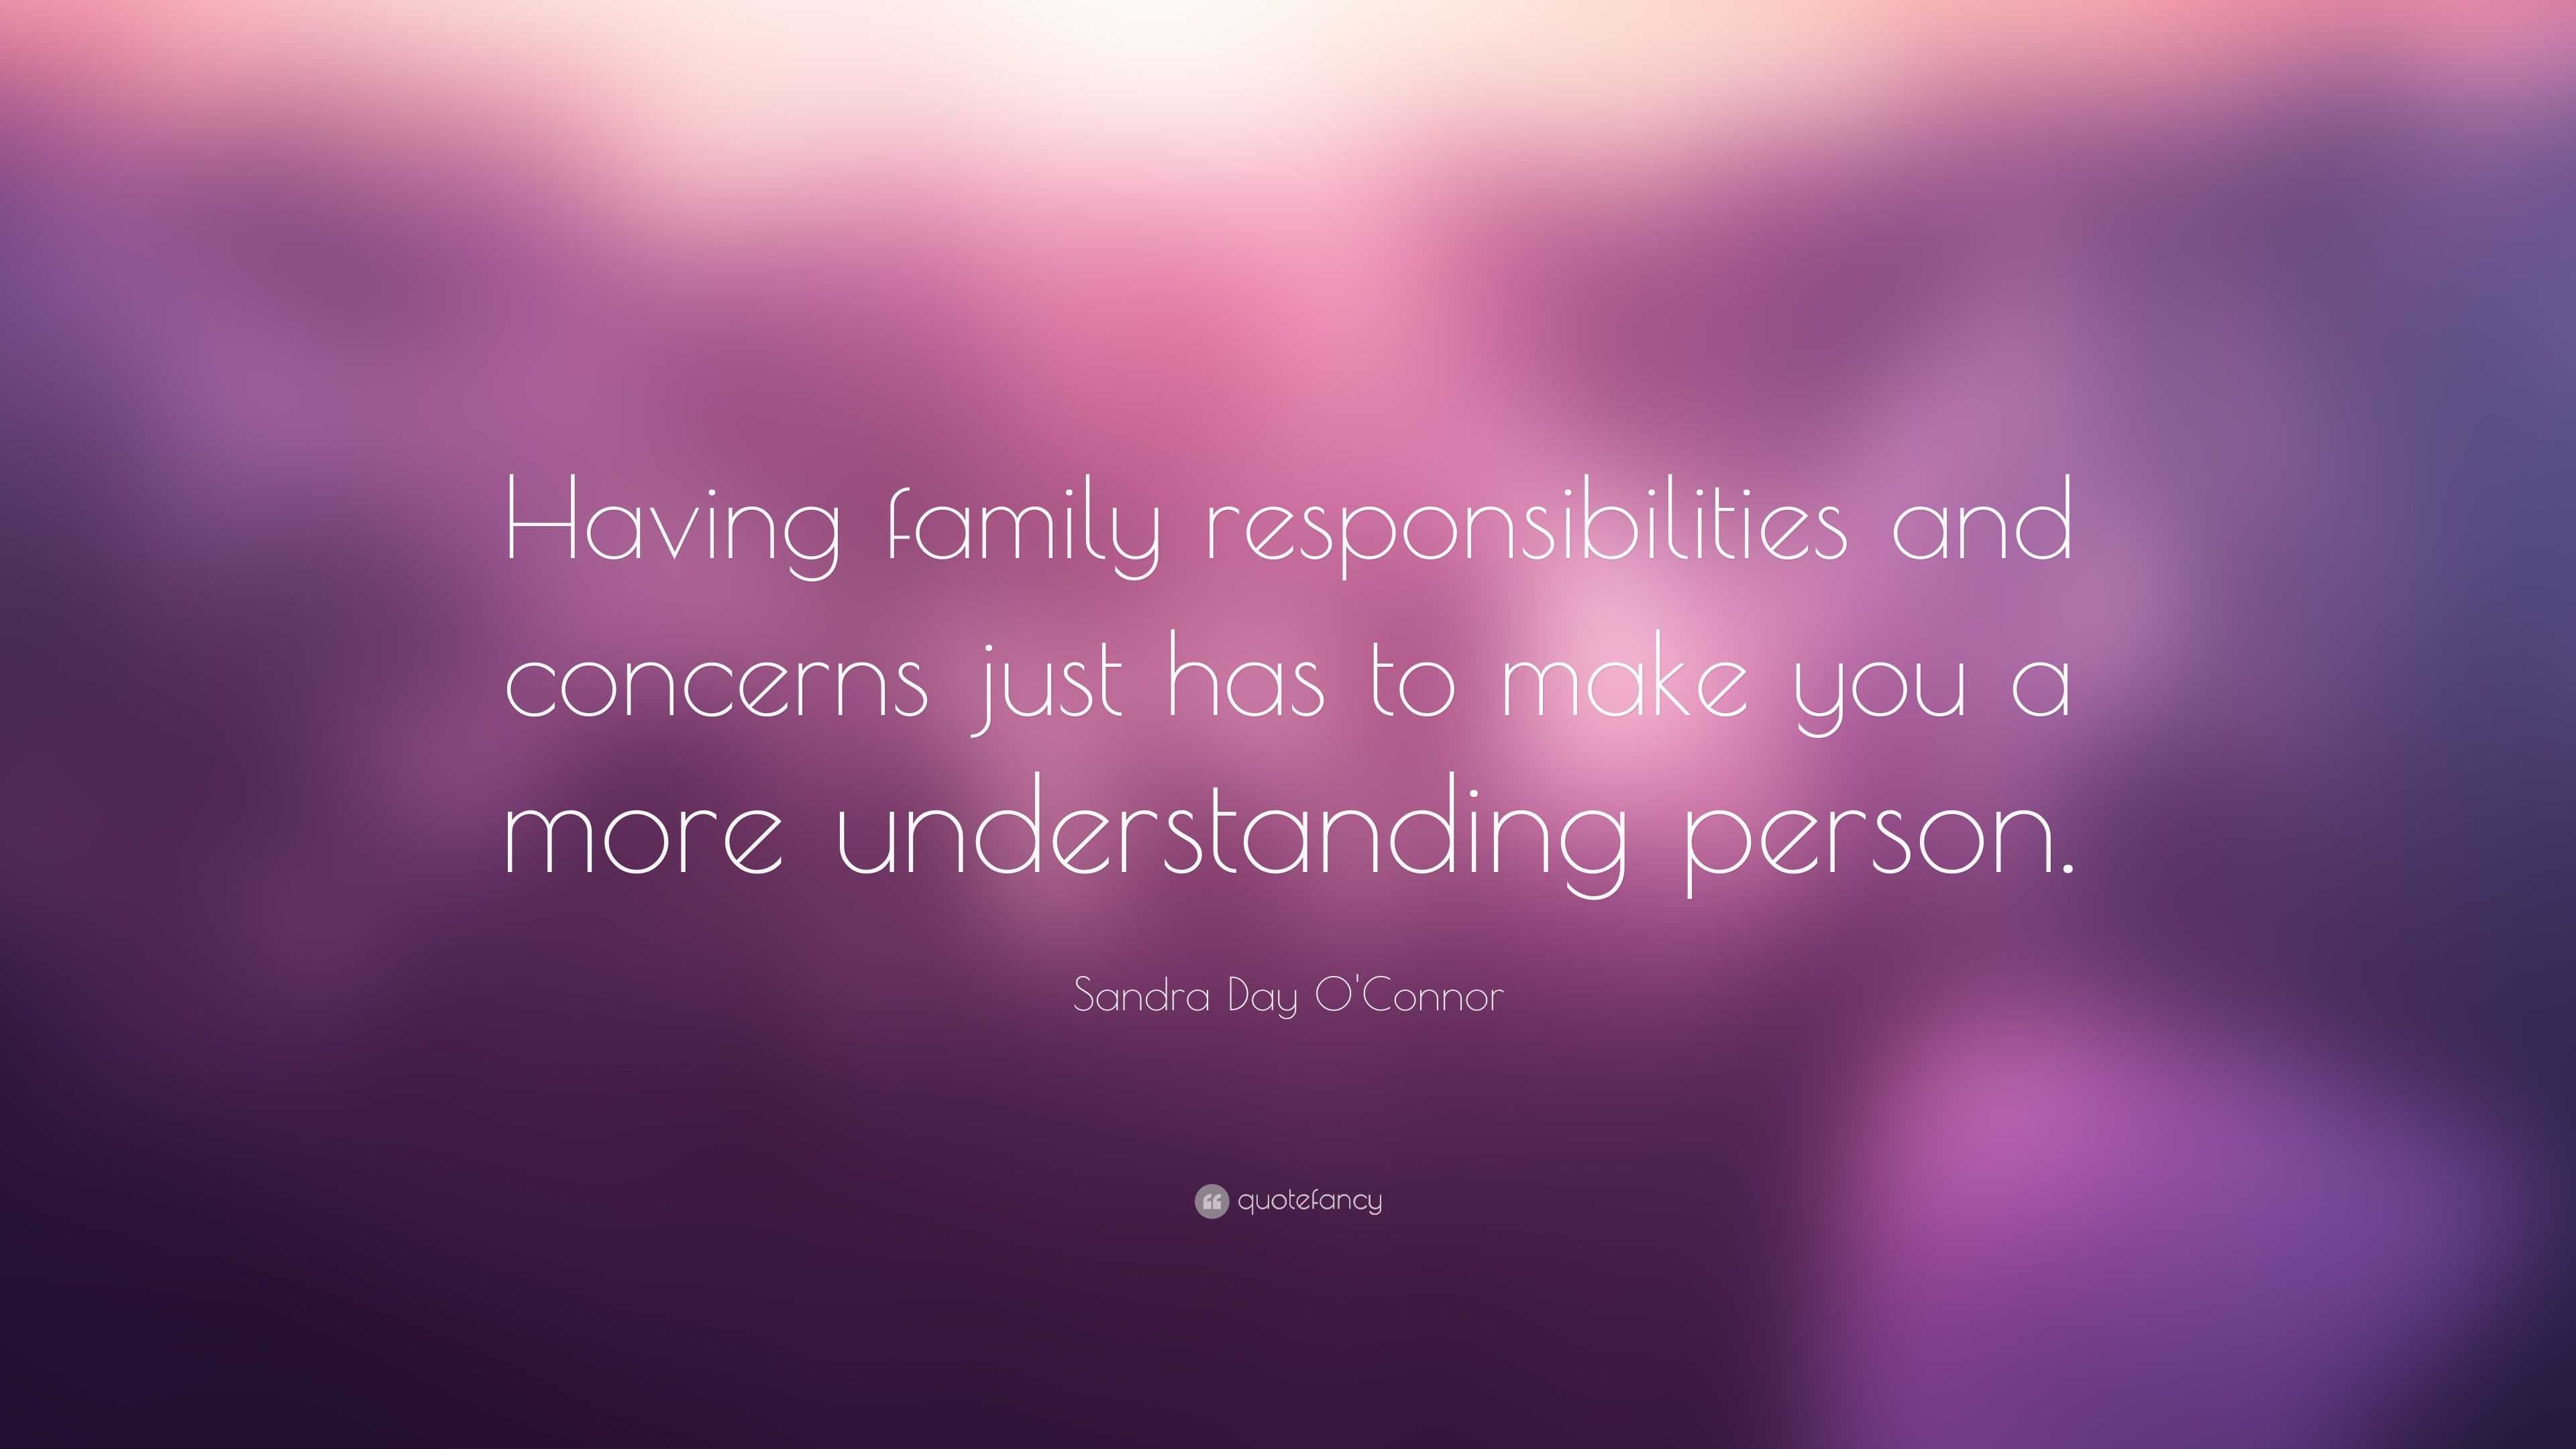 Sandra Day O'Connor Quote: “Having family responsibilities and concerns ...